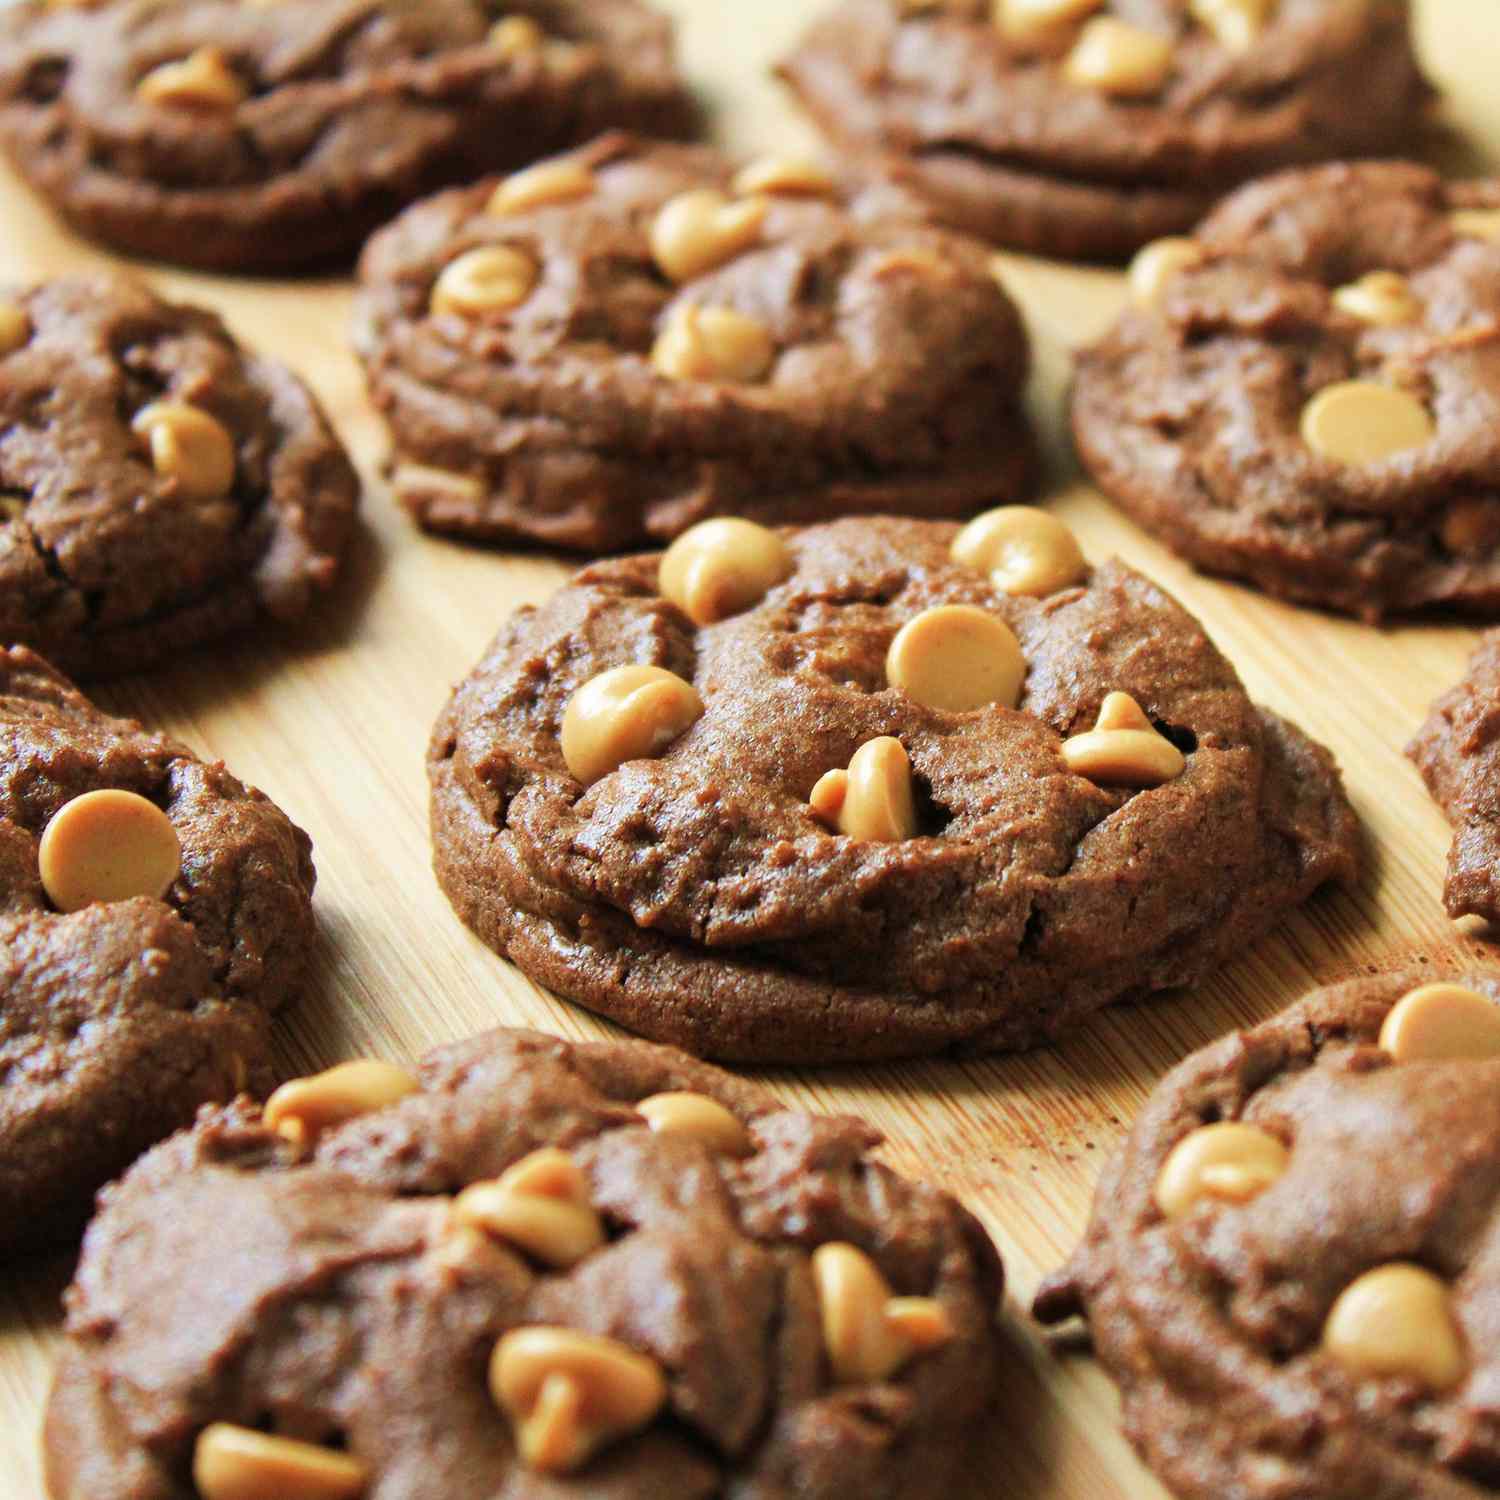 close up view of Peanut Butter Chip Chocolate Cookies on a wooden surface